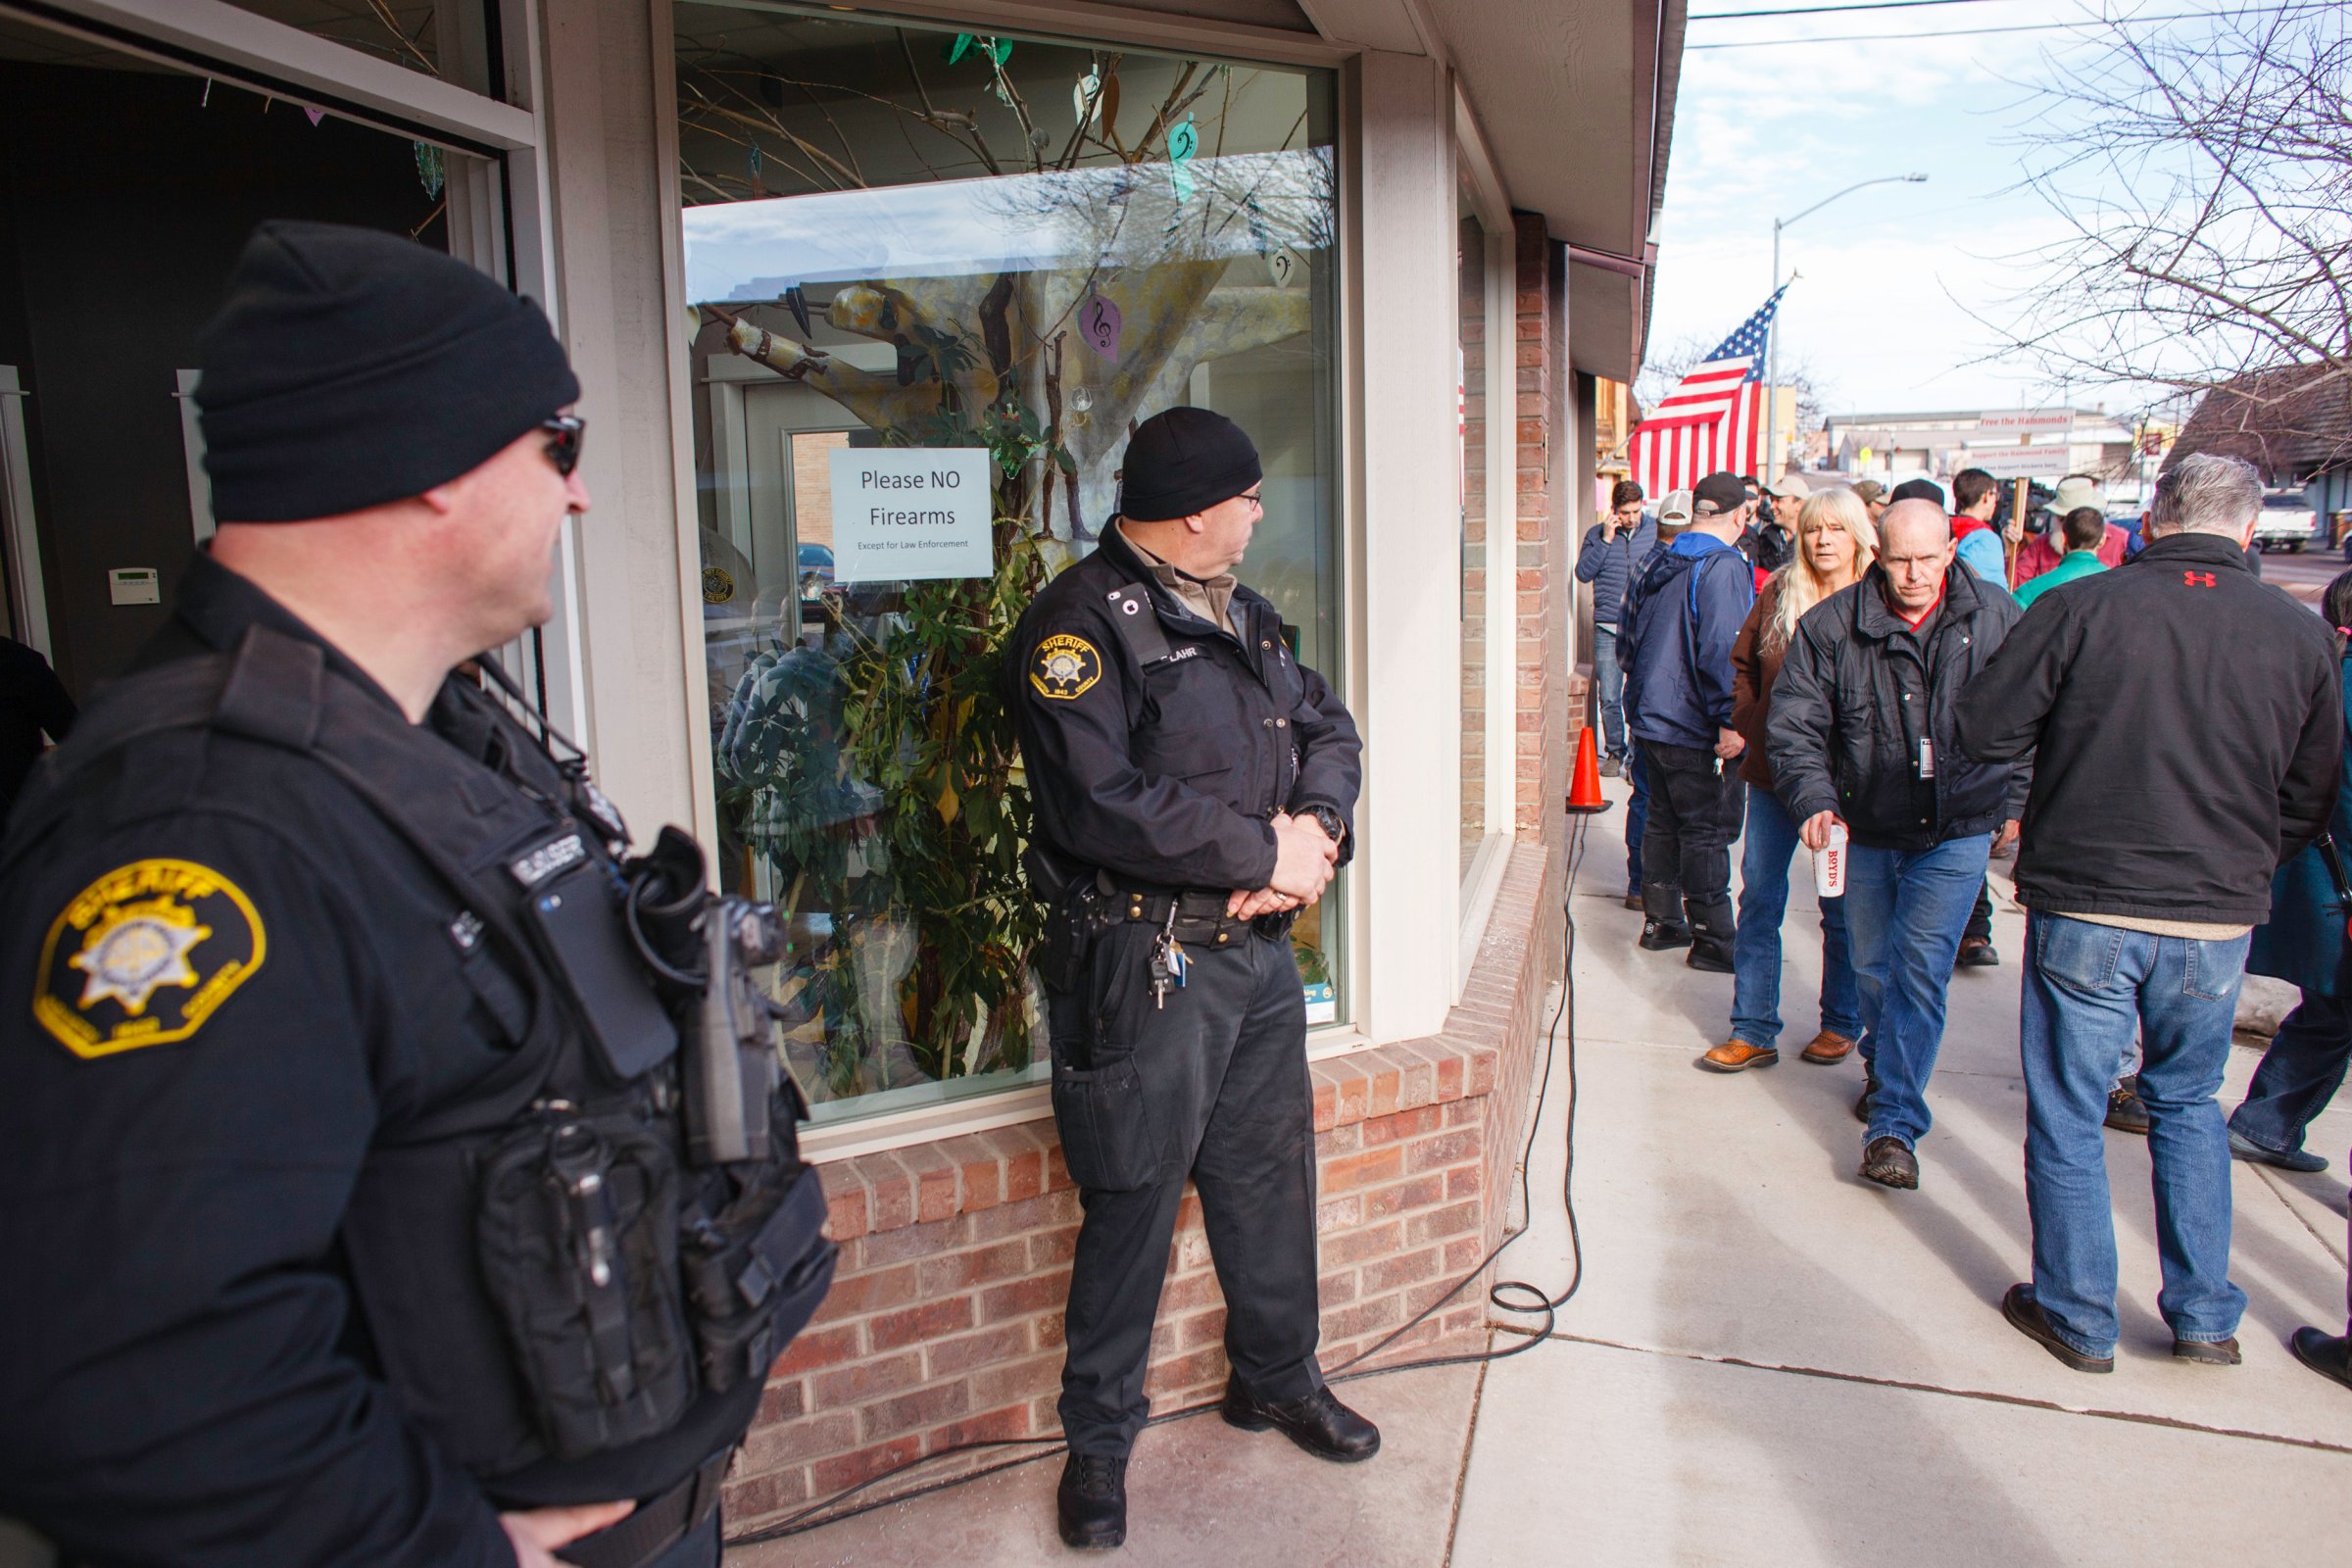 Washington County Sheriff Deputies monitor the public outside of the Harney County Chamber of Commerce where a press conference was being held in Burns, Oregon, on Jan. 27, 2016.